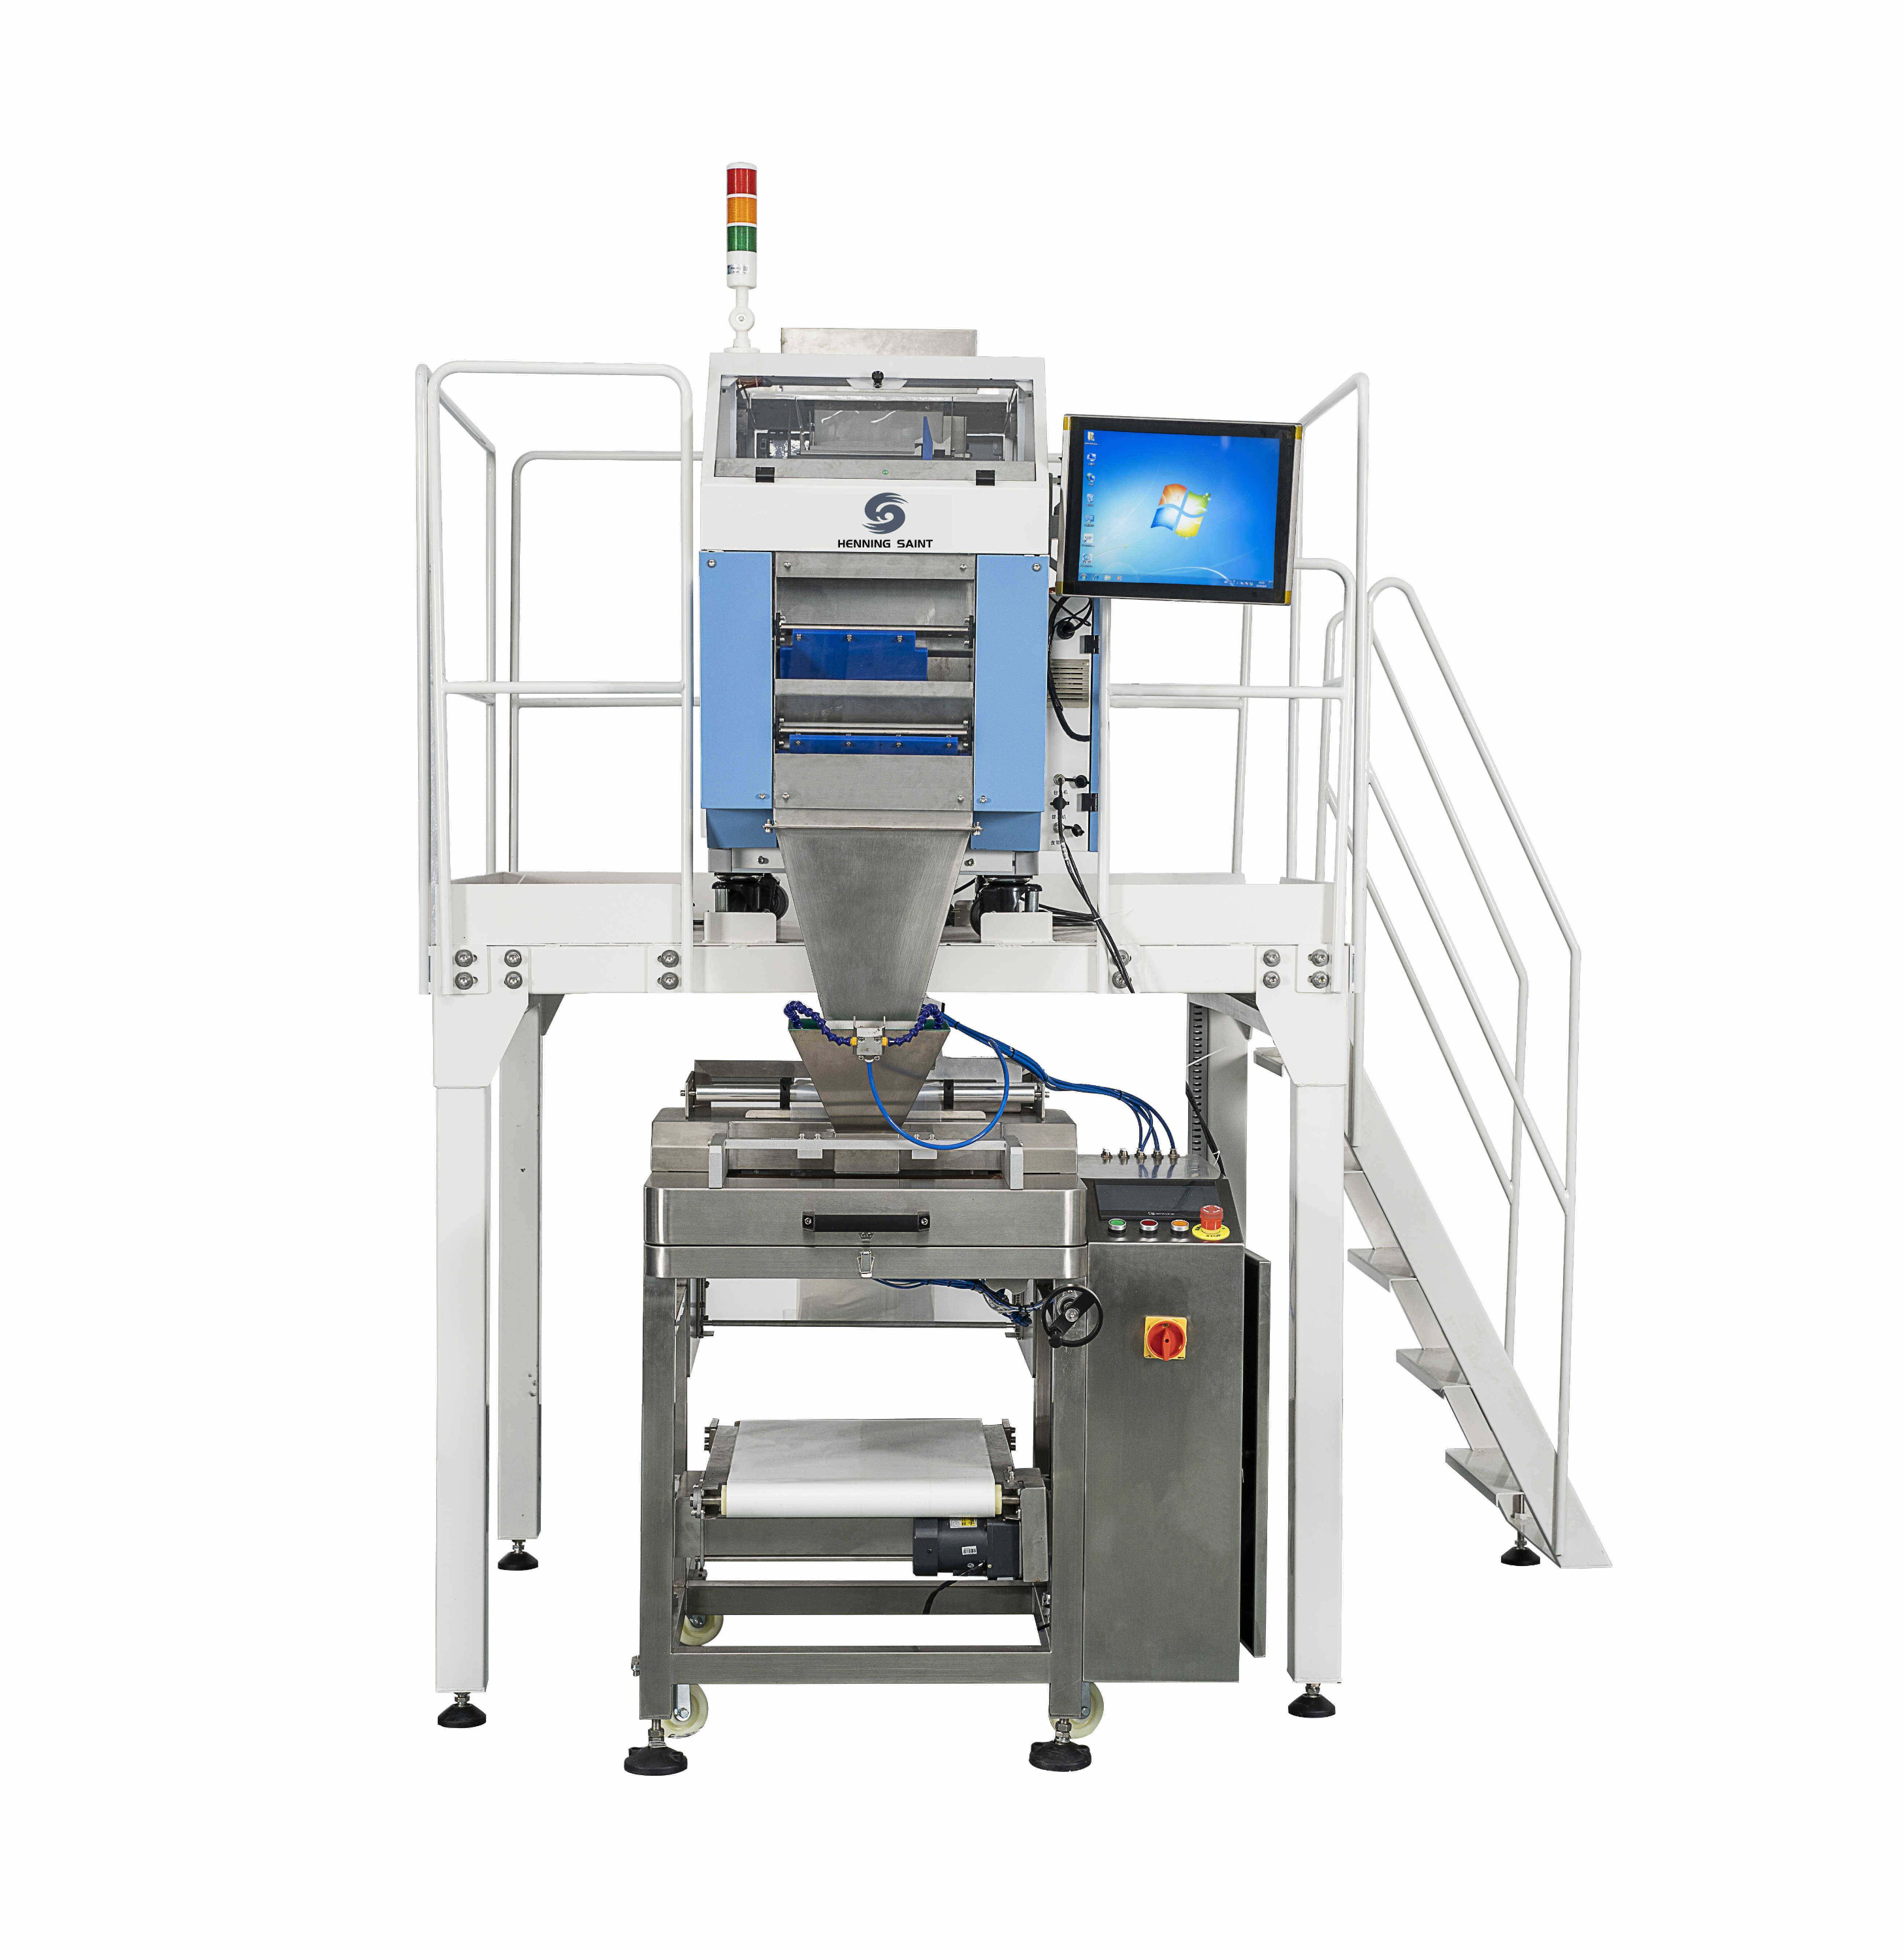 How to choose the right counting equipment?